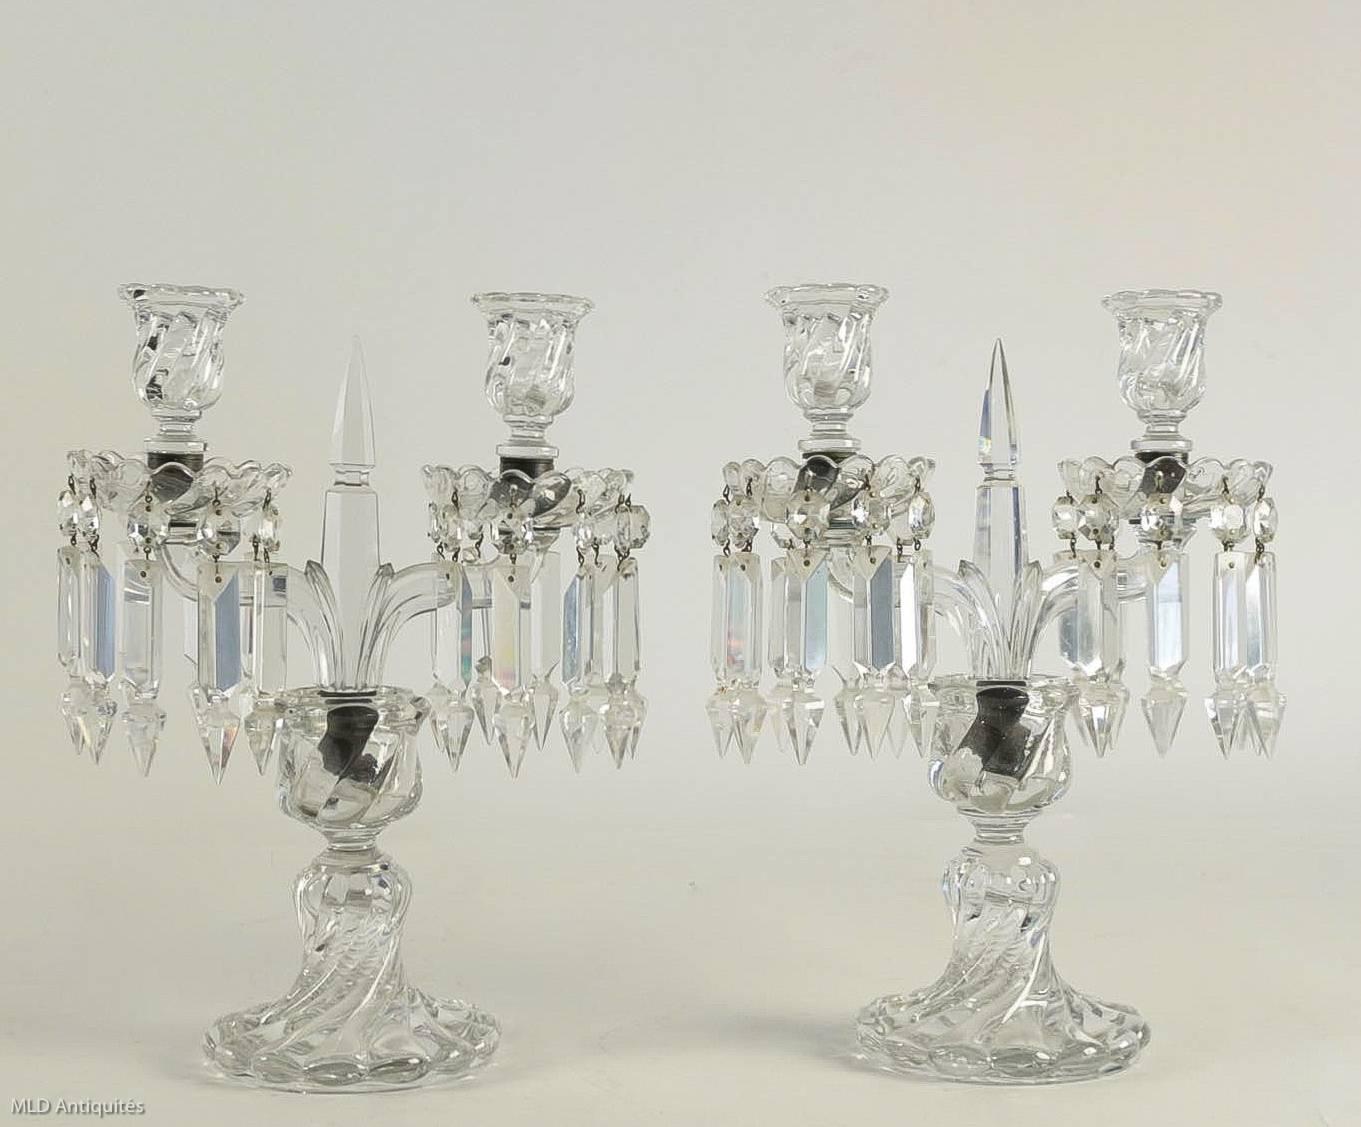 We are pleased to present you a lovely and fine cut crystal pair of candelabras, with two candlesticks arm-candlestick lights, with cut crystal pendants on the candle cups, raised on a circular cut crystal base.

A lovely French work late 19th